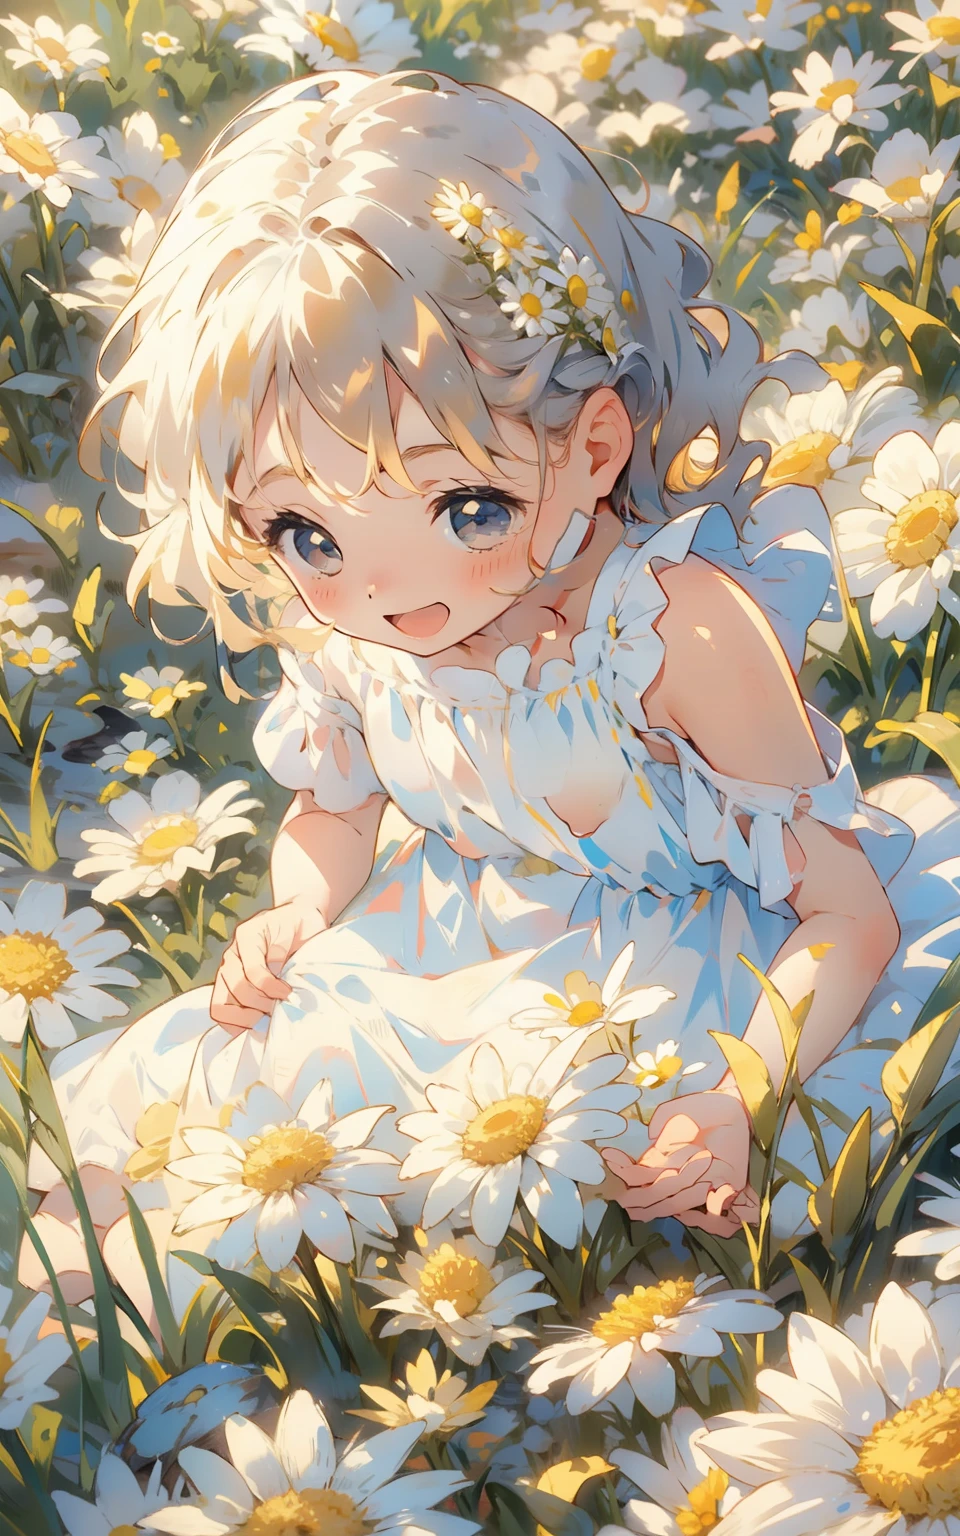 Daisy Child's Dream： In a sunny field，An innocent and cute teenage girl wears a white dress，She sat on a meadow full of daisies，Holding a garland in his hand。Her eyes revealed innocence and joy，Surrounded by white and yellow daisies，The whole scene is full of childlike fun and joy。